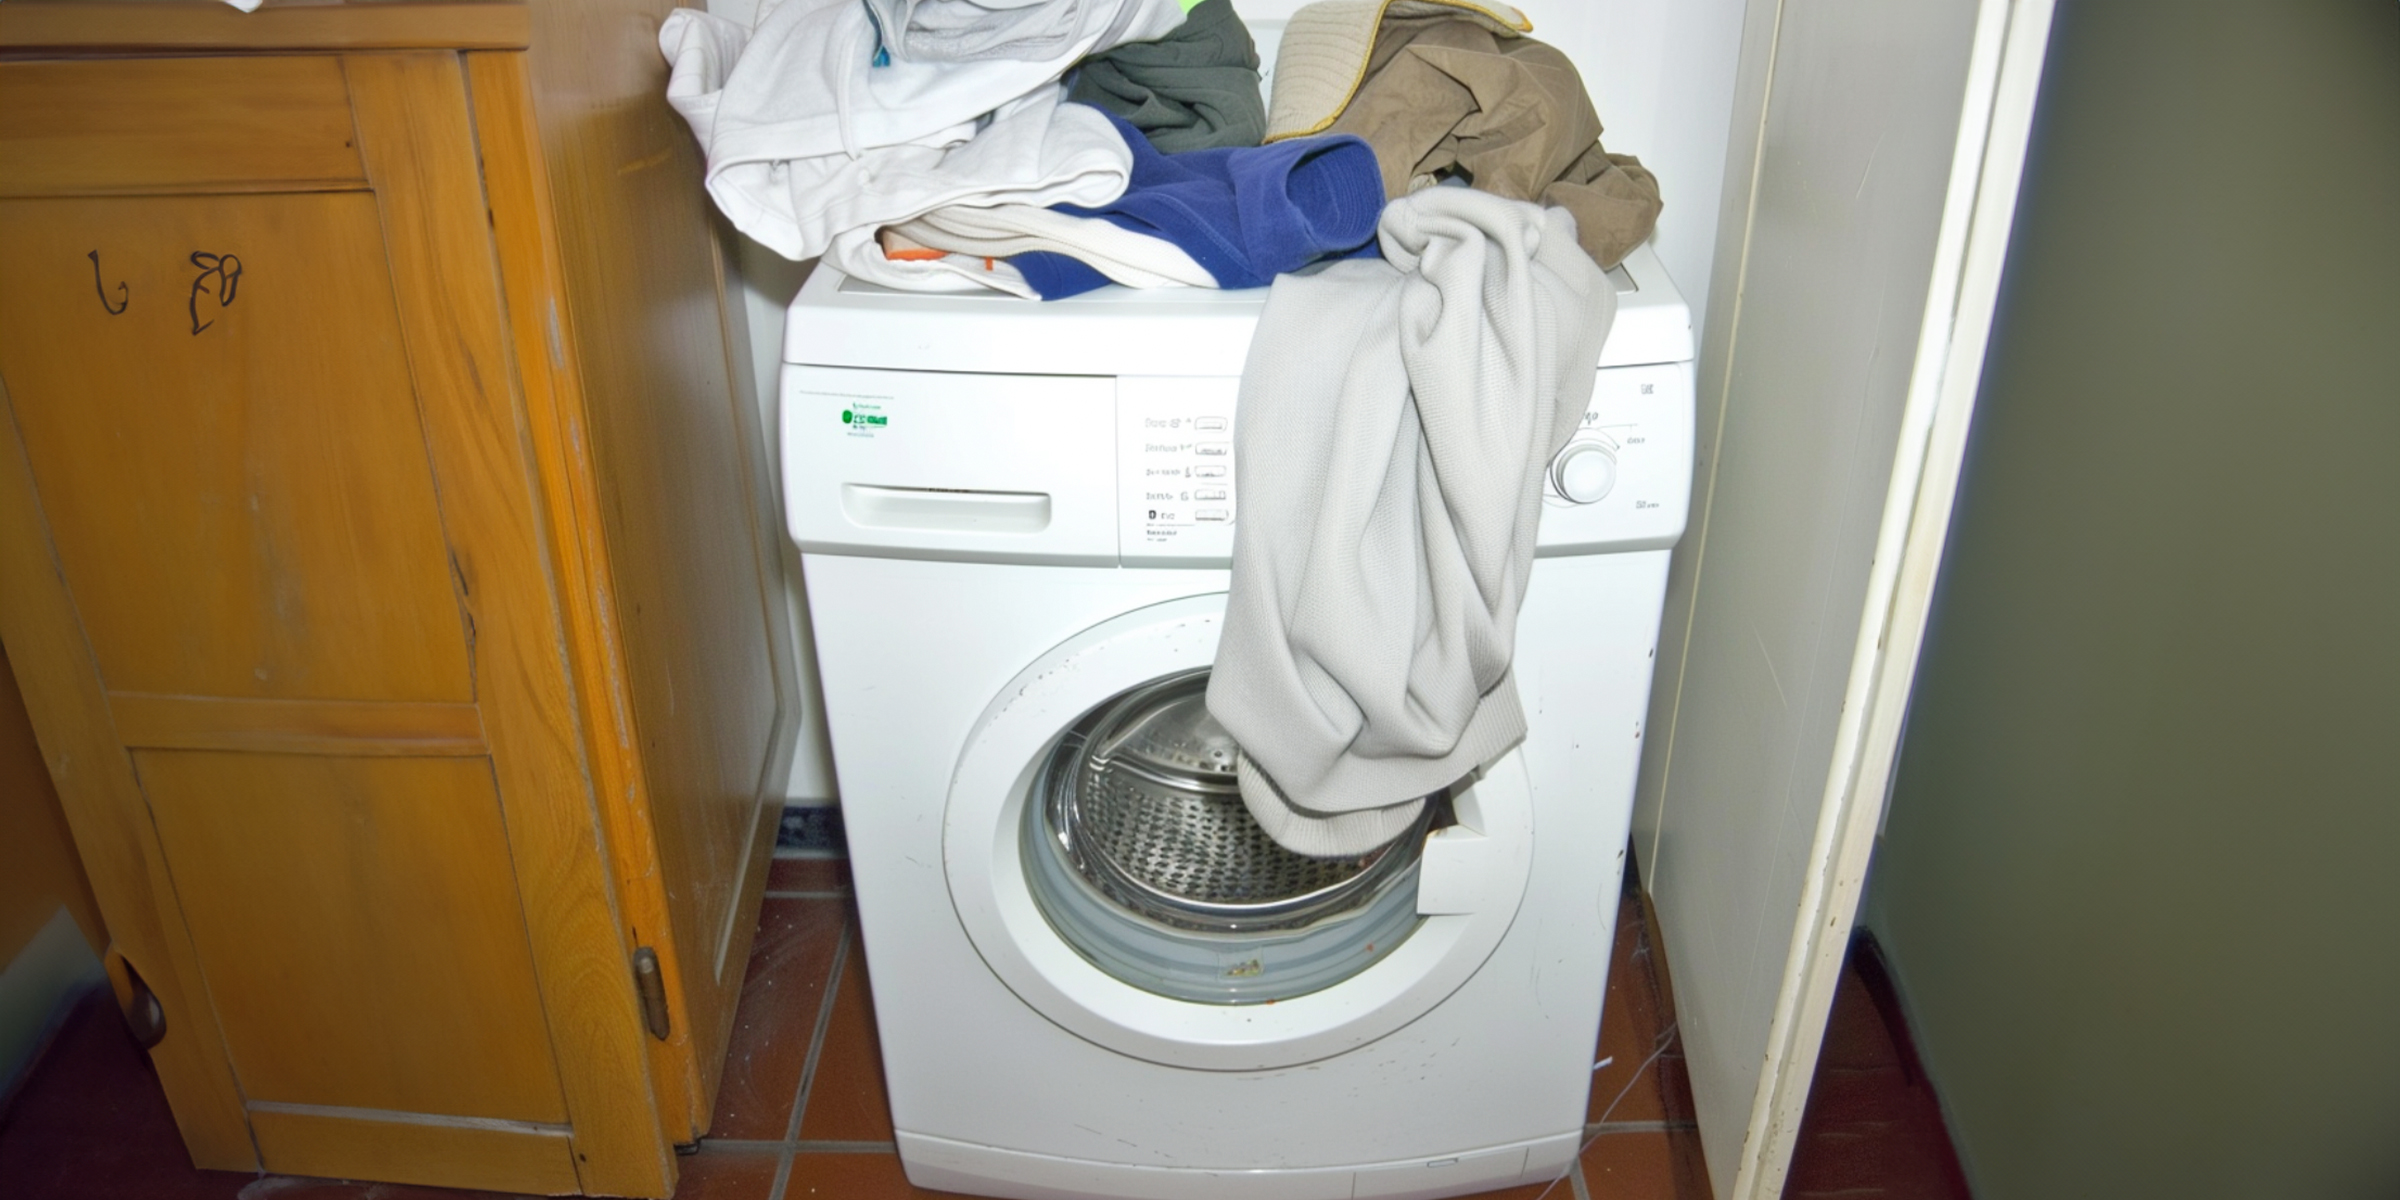 A bunch of clothes on top of a washing machine | Source: Amomama